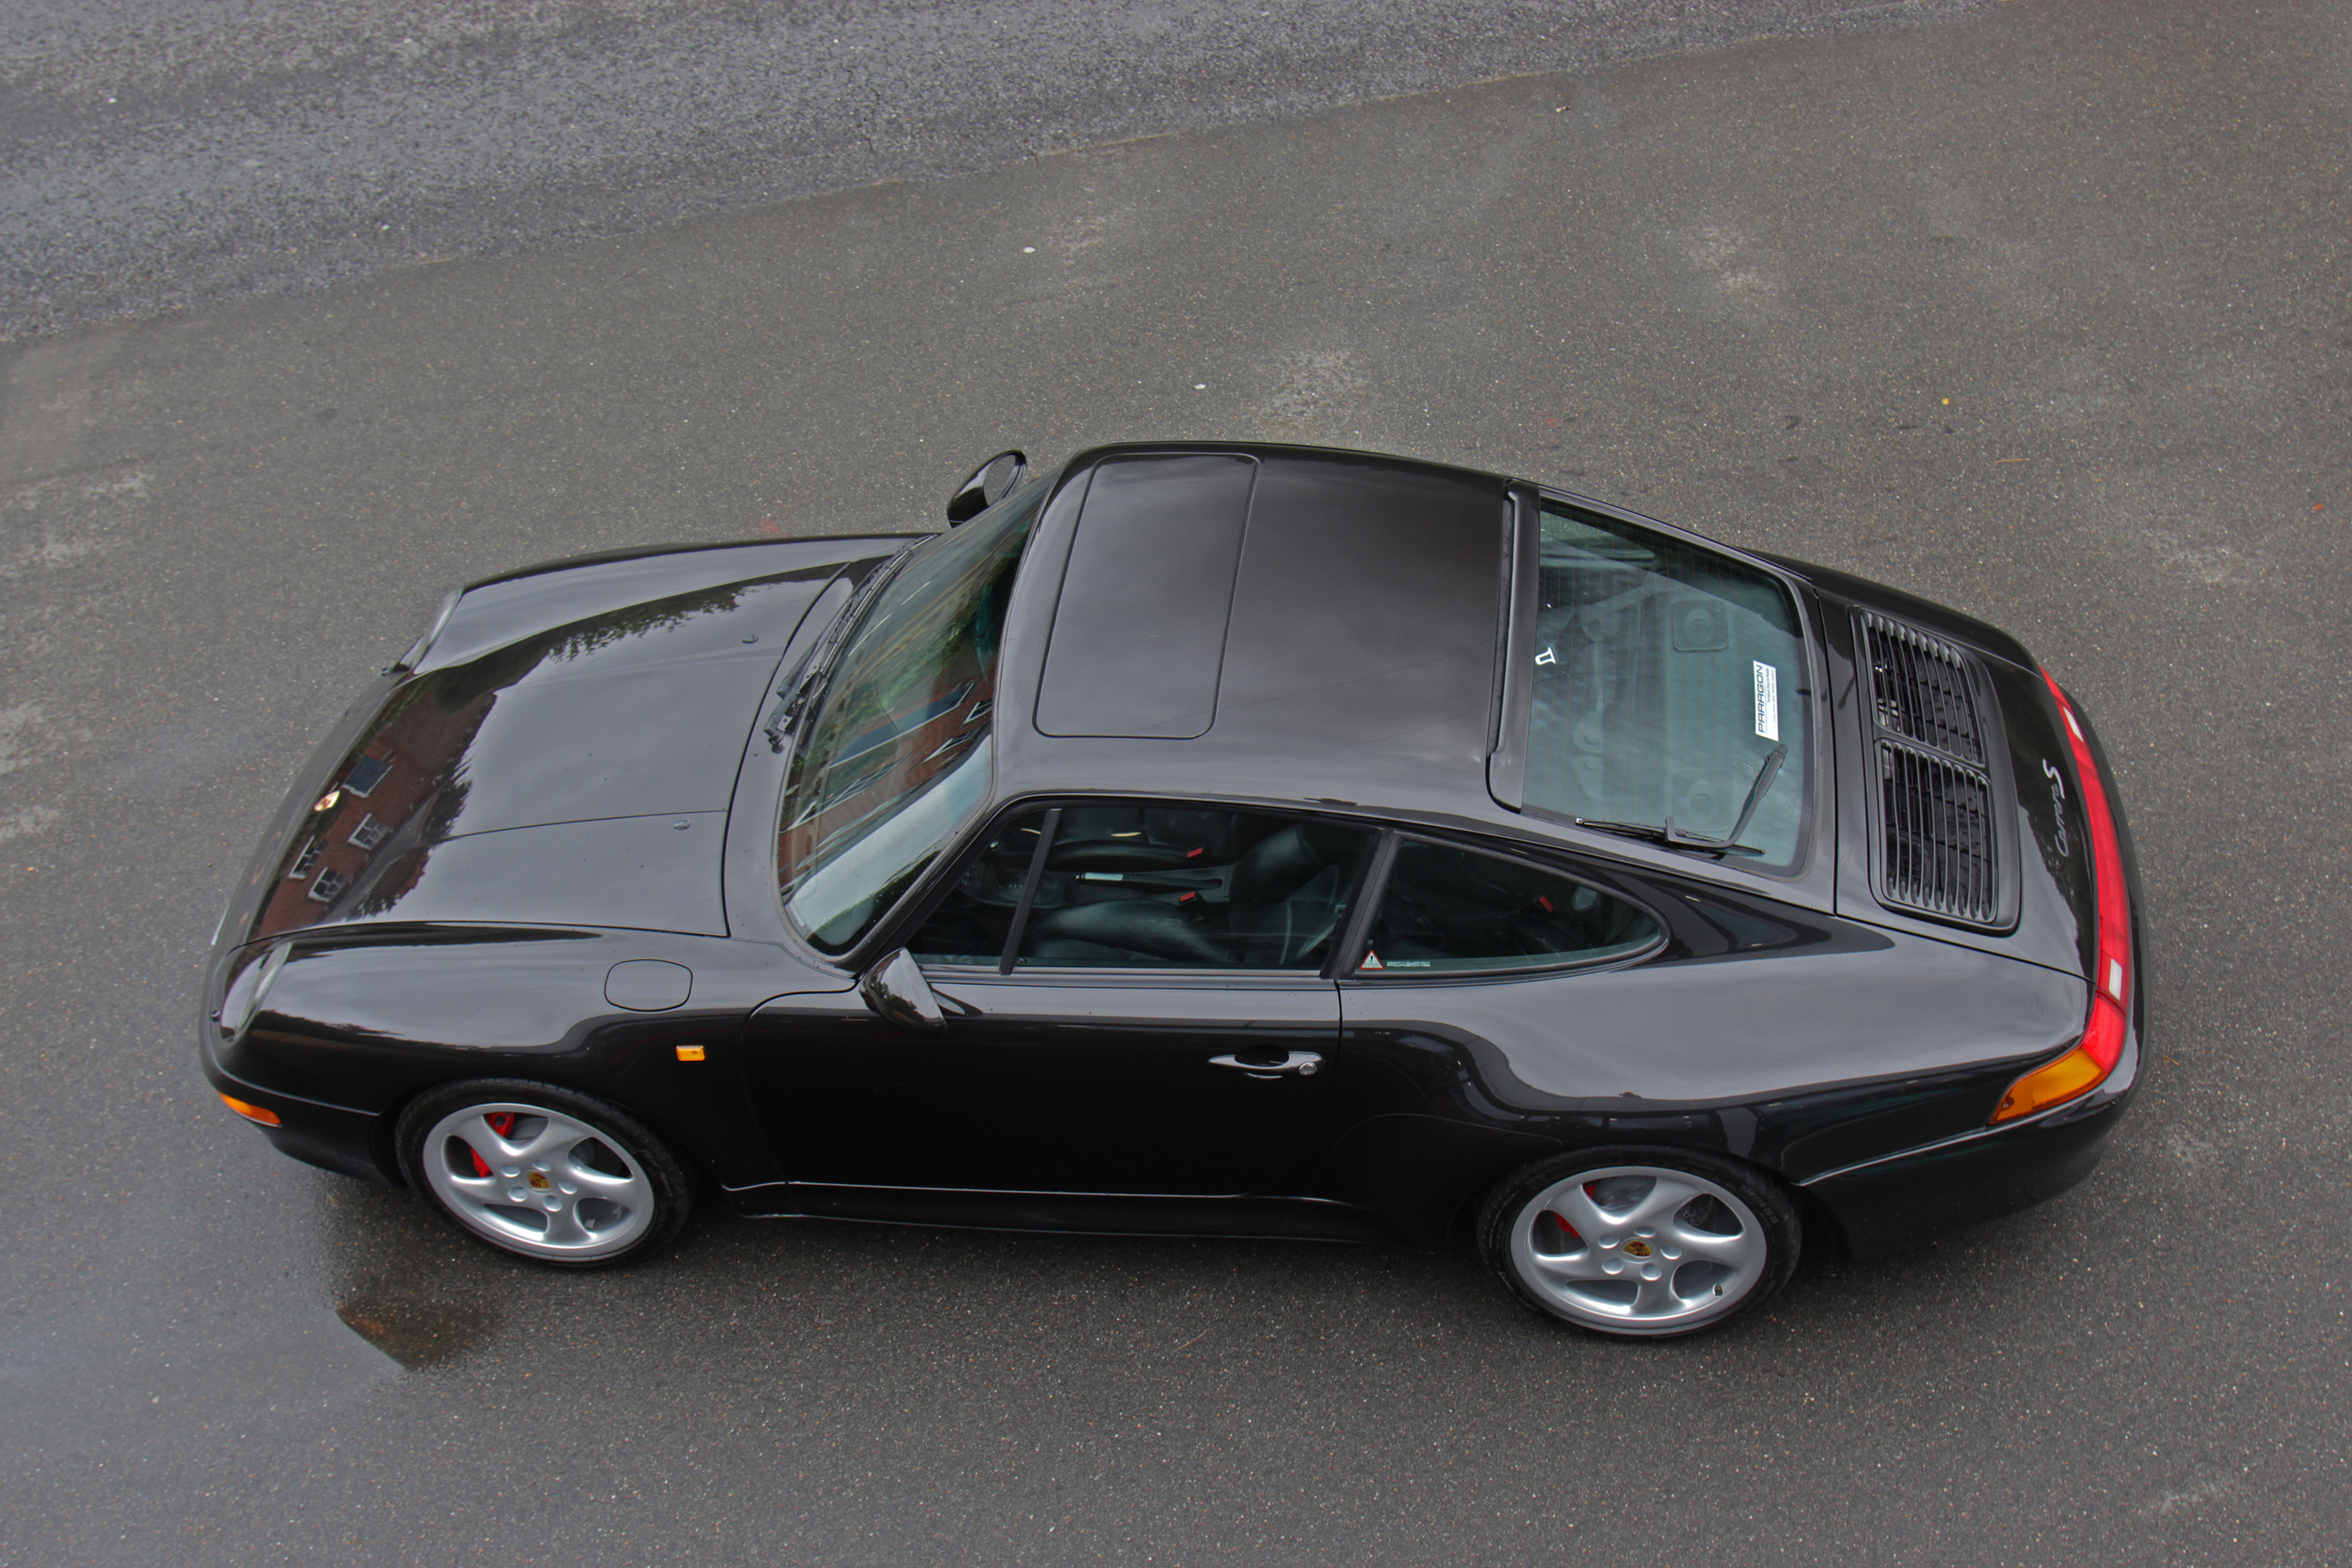 911 Carrera 2 S (993) for sale at Paragon Porsche in East Sussex